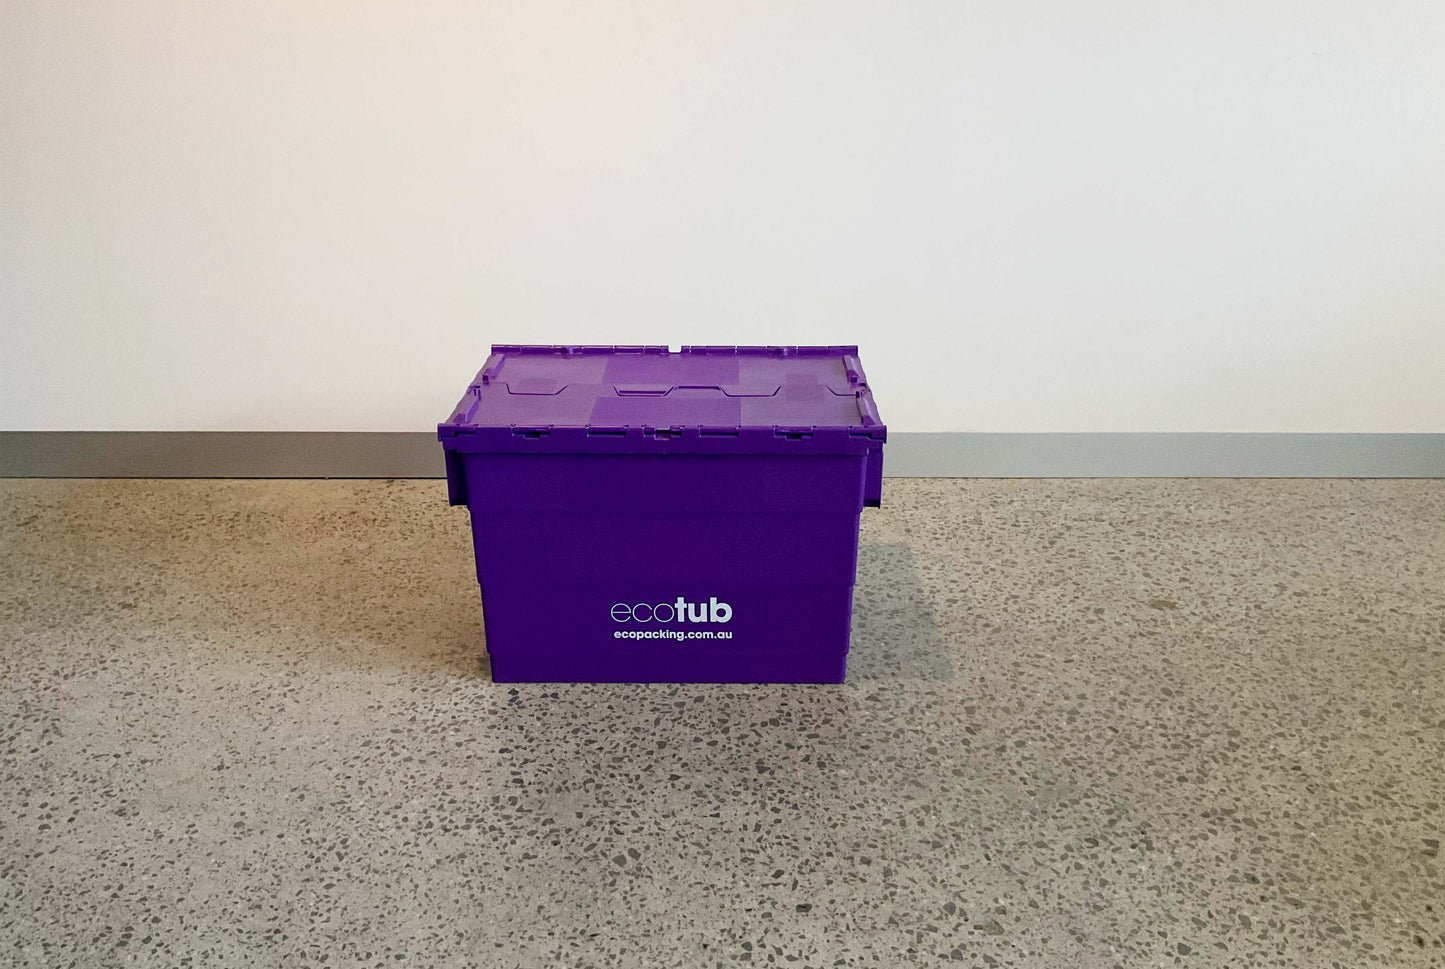 The large eco packing tub shown from side on, is plain purple with the word eco tub and the eco packing website address.